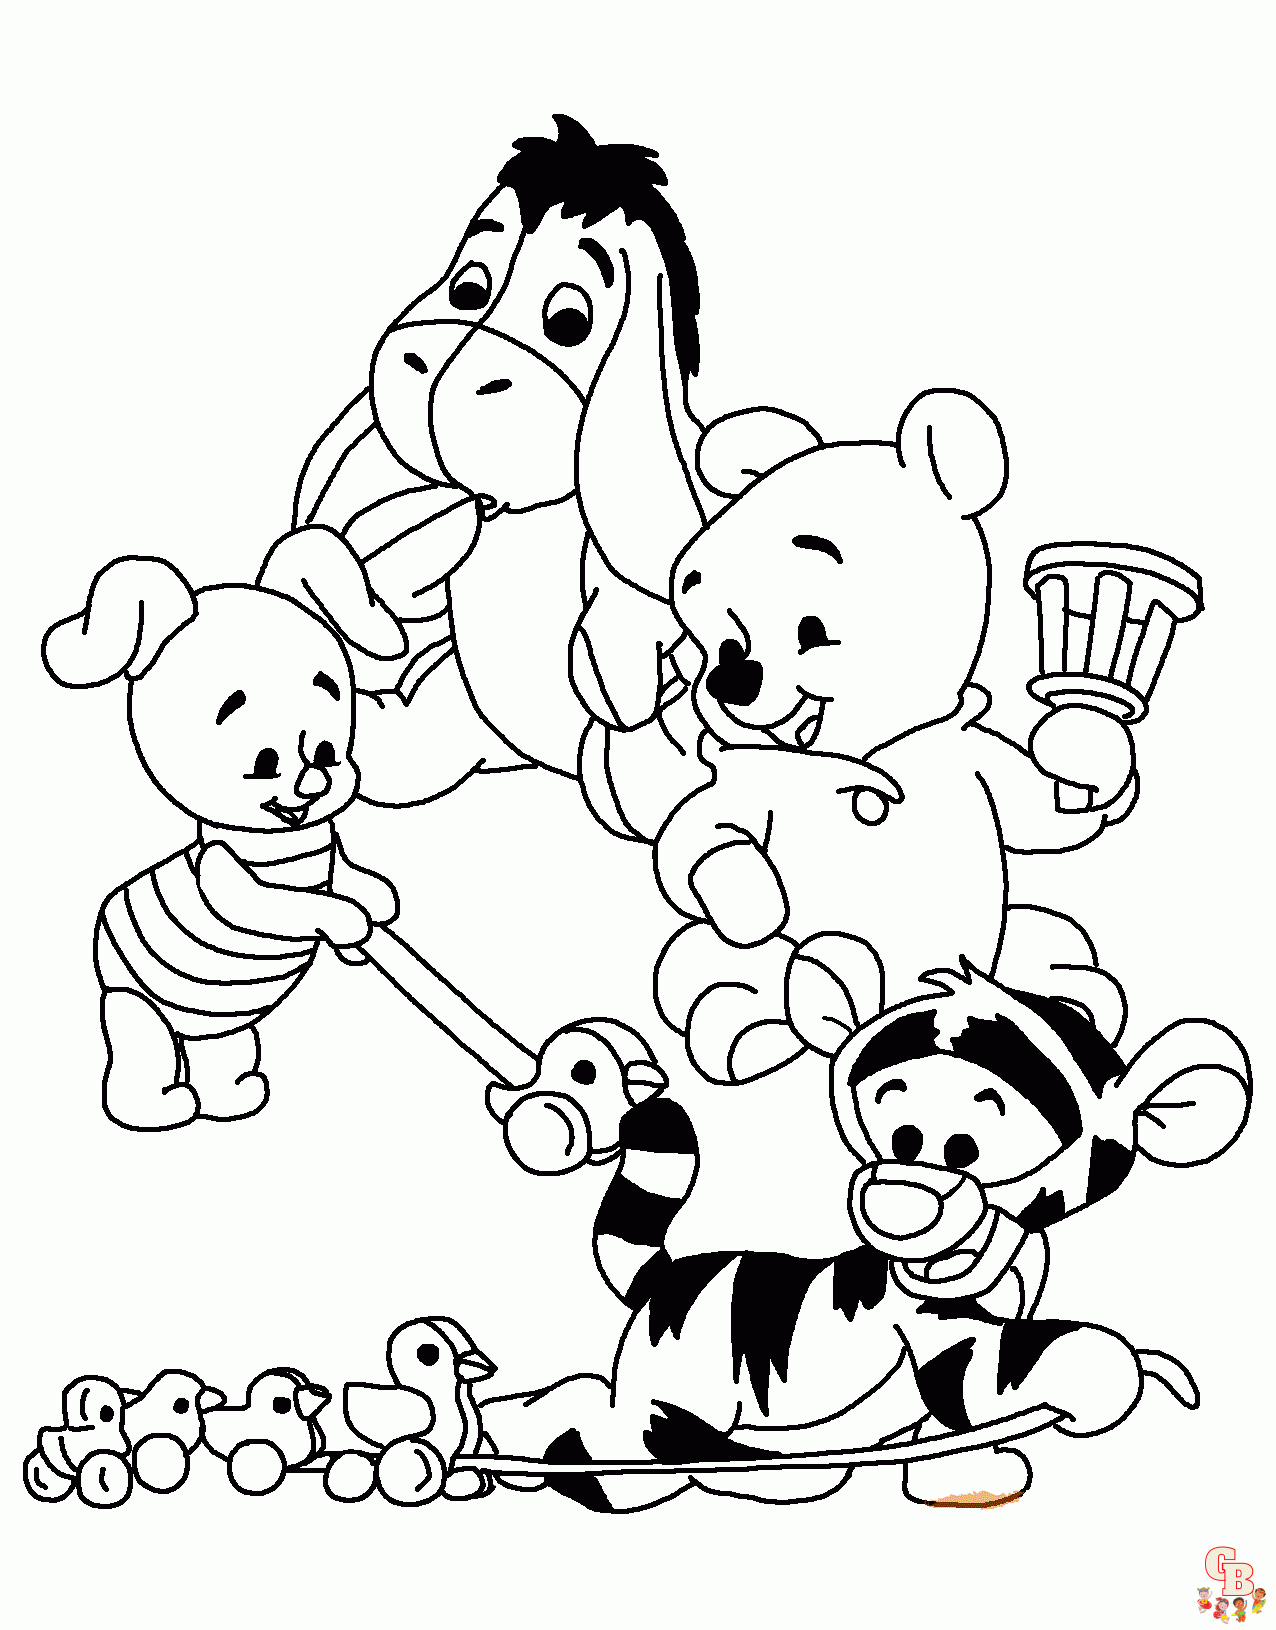 Cute disney babies coloring pages free printable sheets for kids